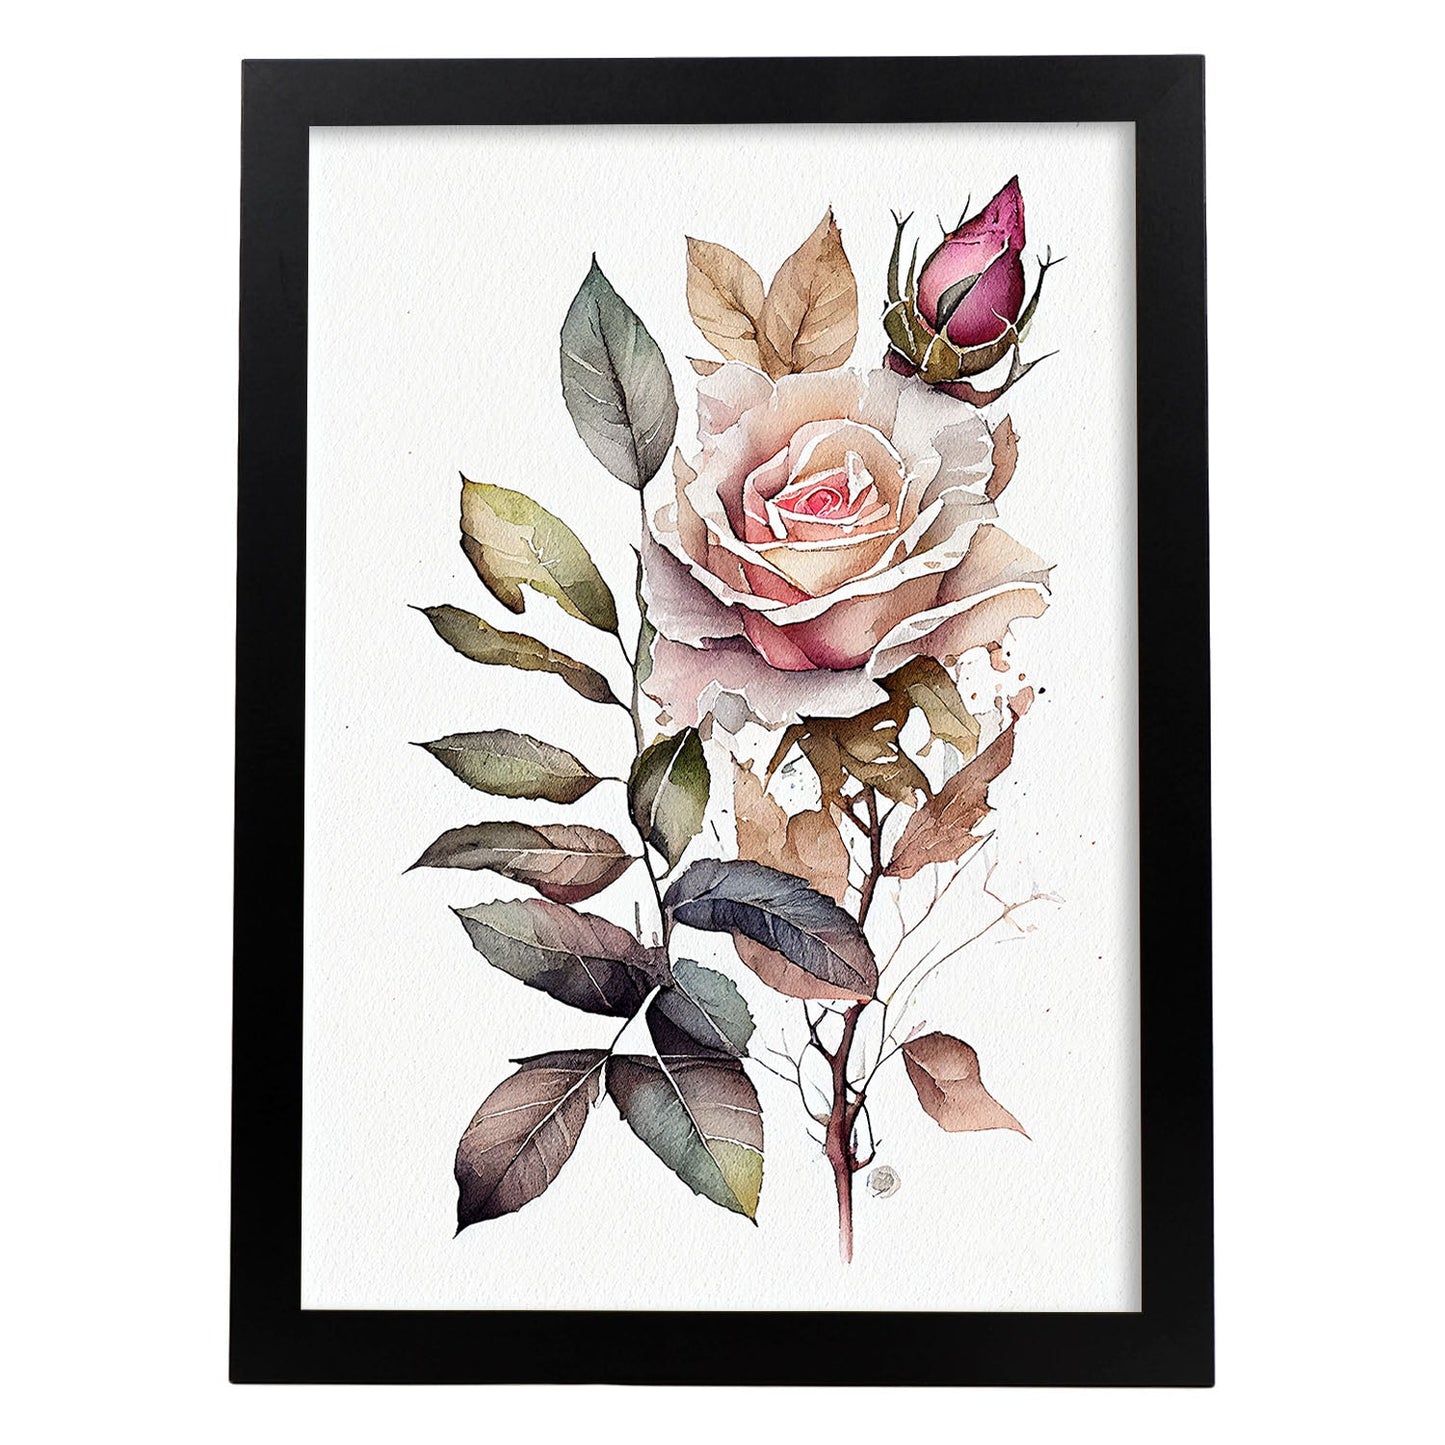 Nacnic watercolor minmal Rose_2. Aesthetic Wall Art Prints for Bedroom or Living Room Design.